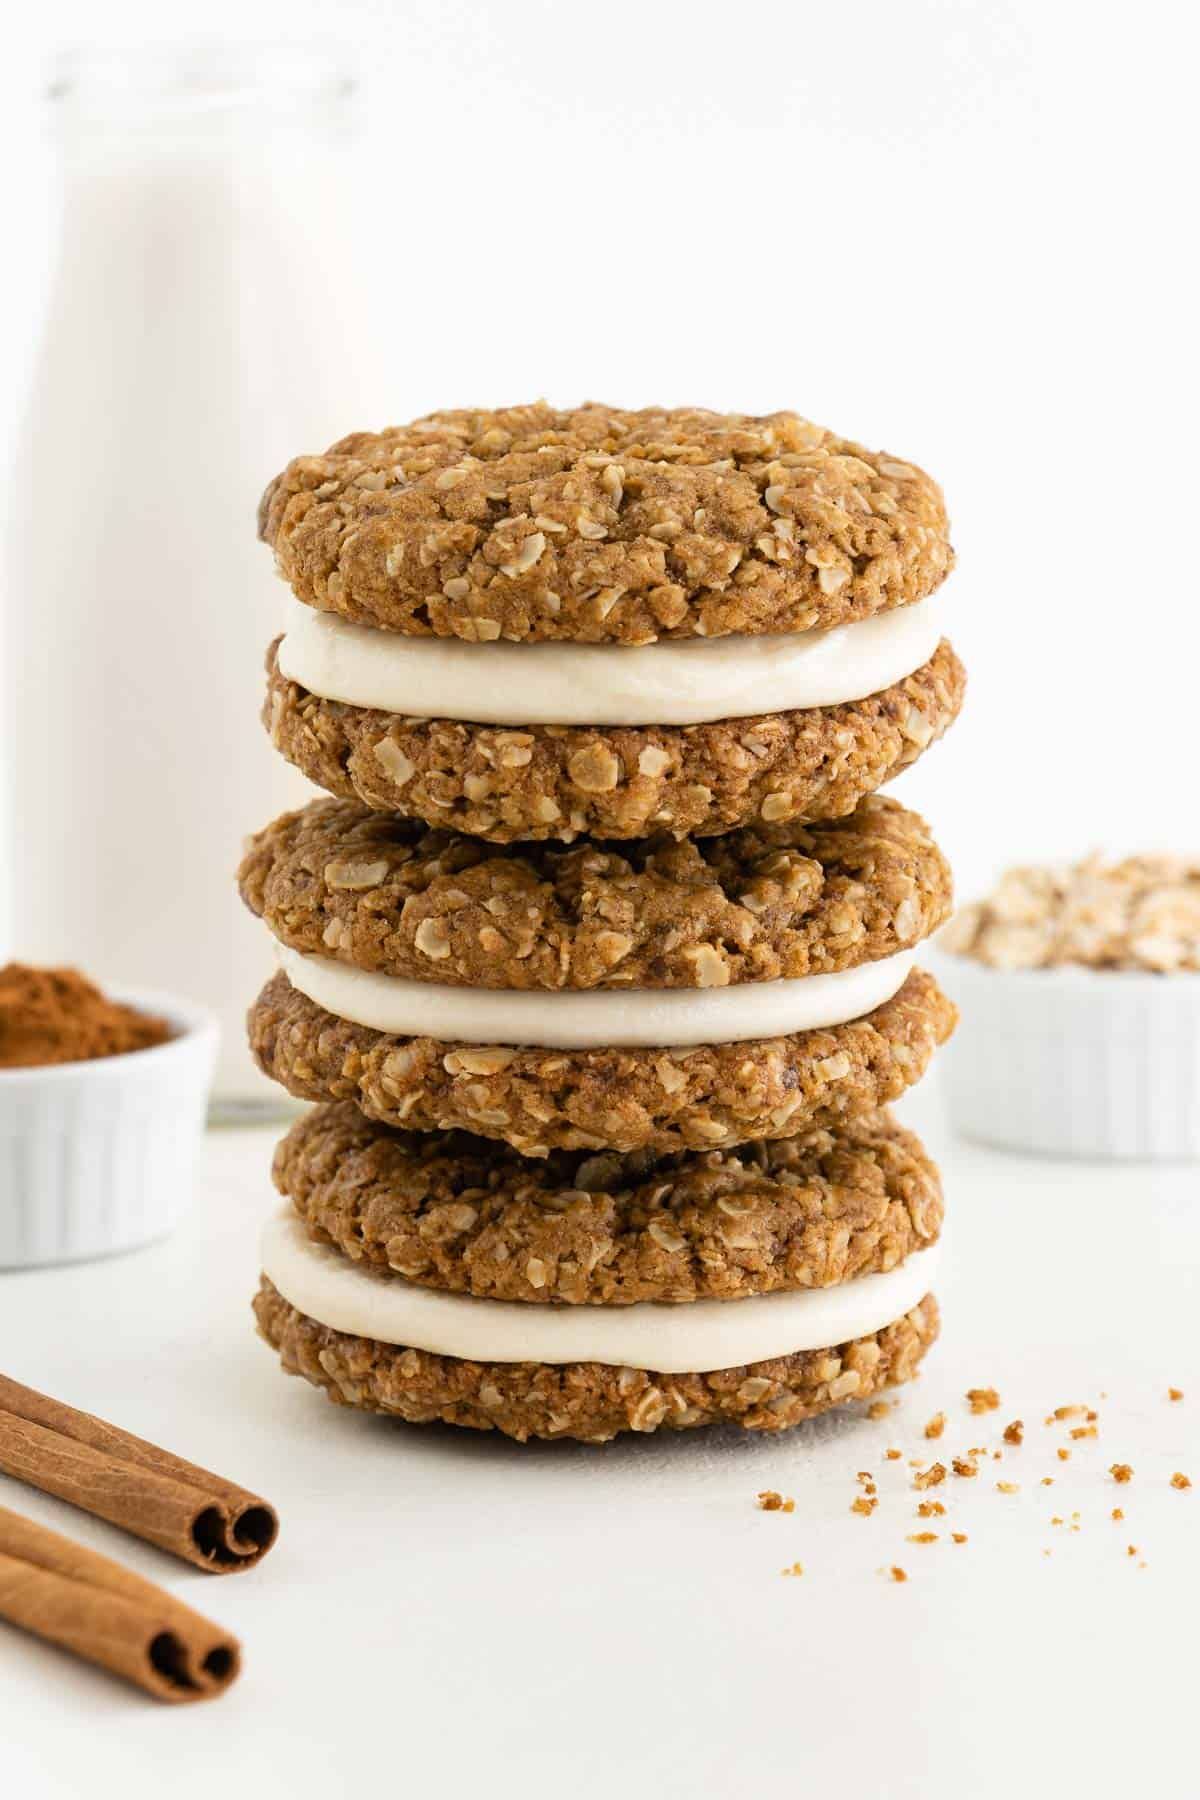 a pile of oatmeal cream pies are on a white surface surrounded by a bow of cinnamon, a bowl of oats, and 2 cinnamon sticks